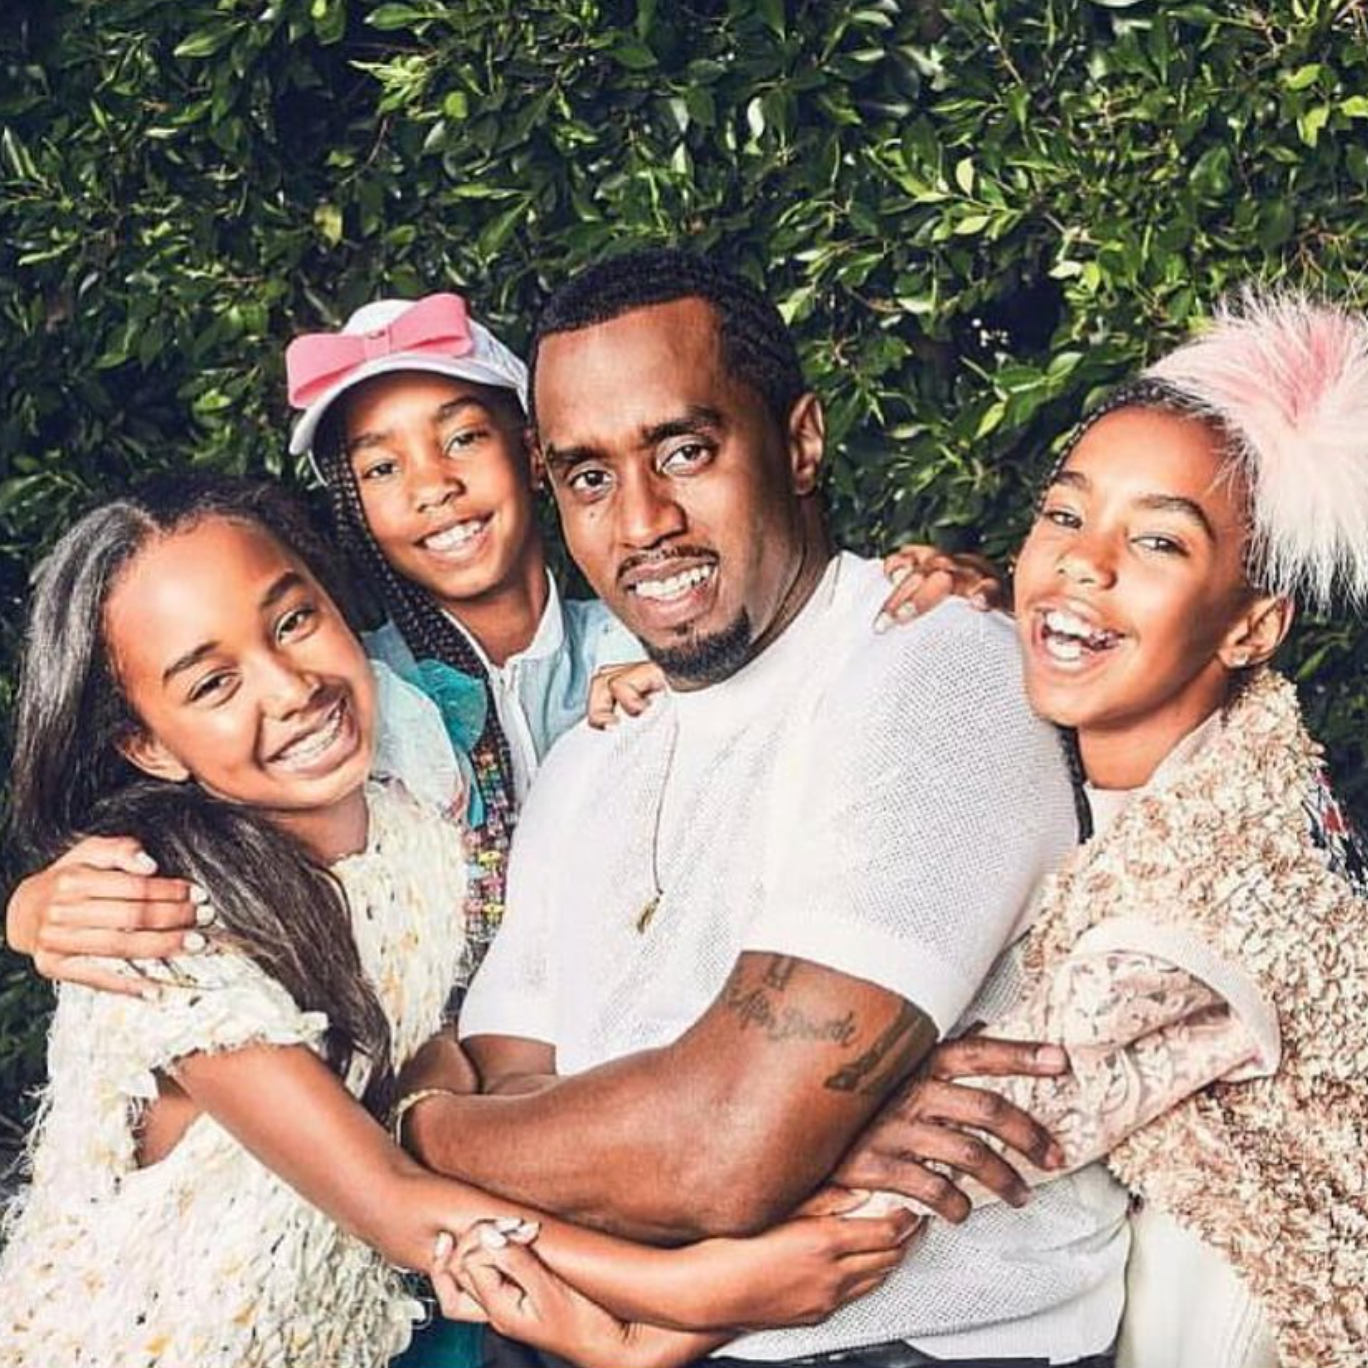 Diddy Opens Up About His 'Day 1' As A Single Father: 'Today The Journey Begins'